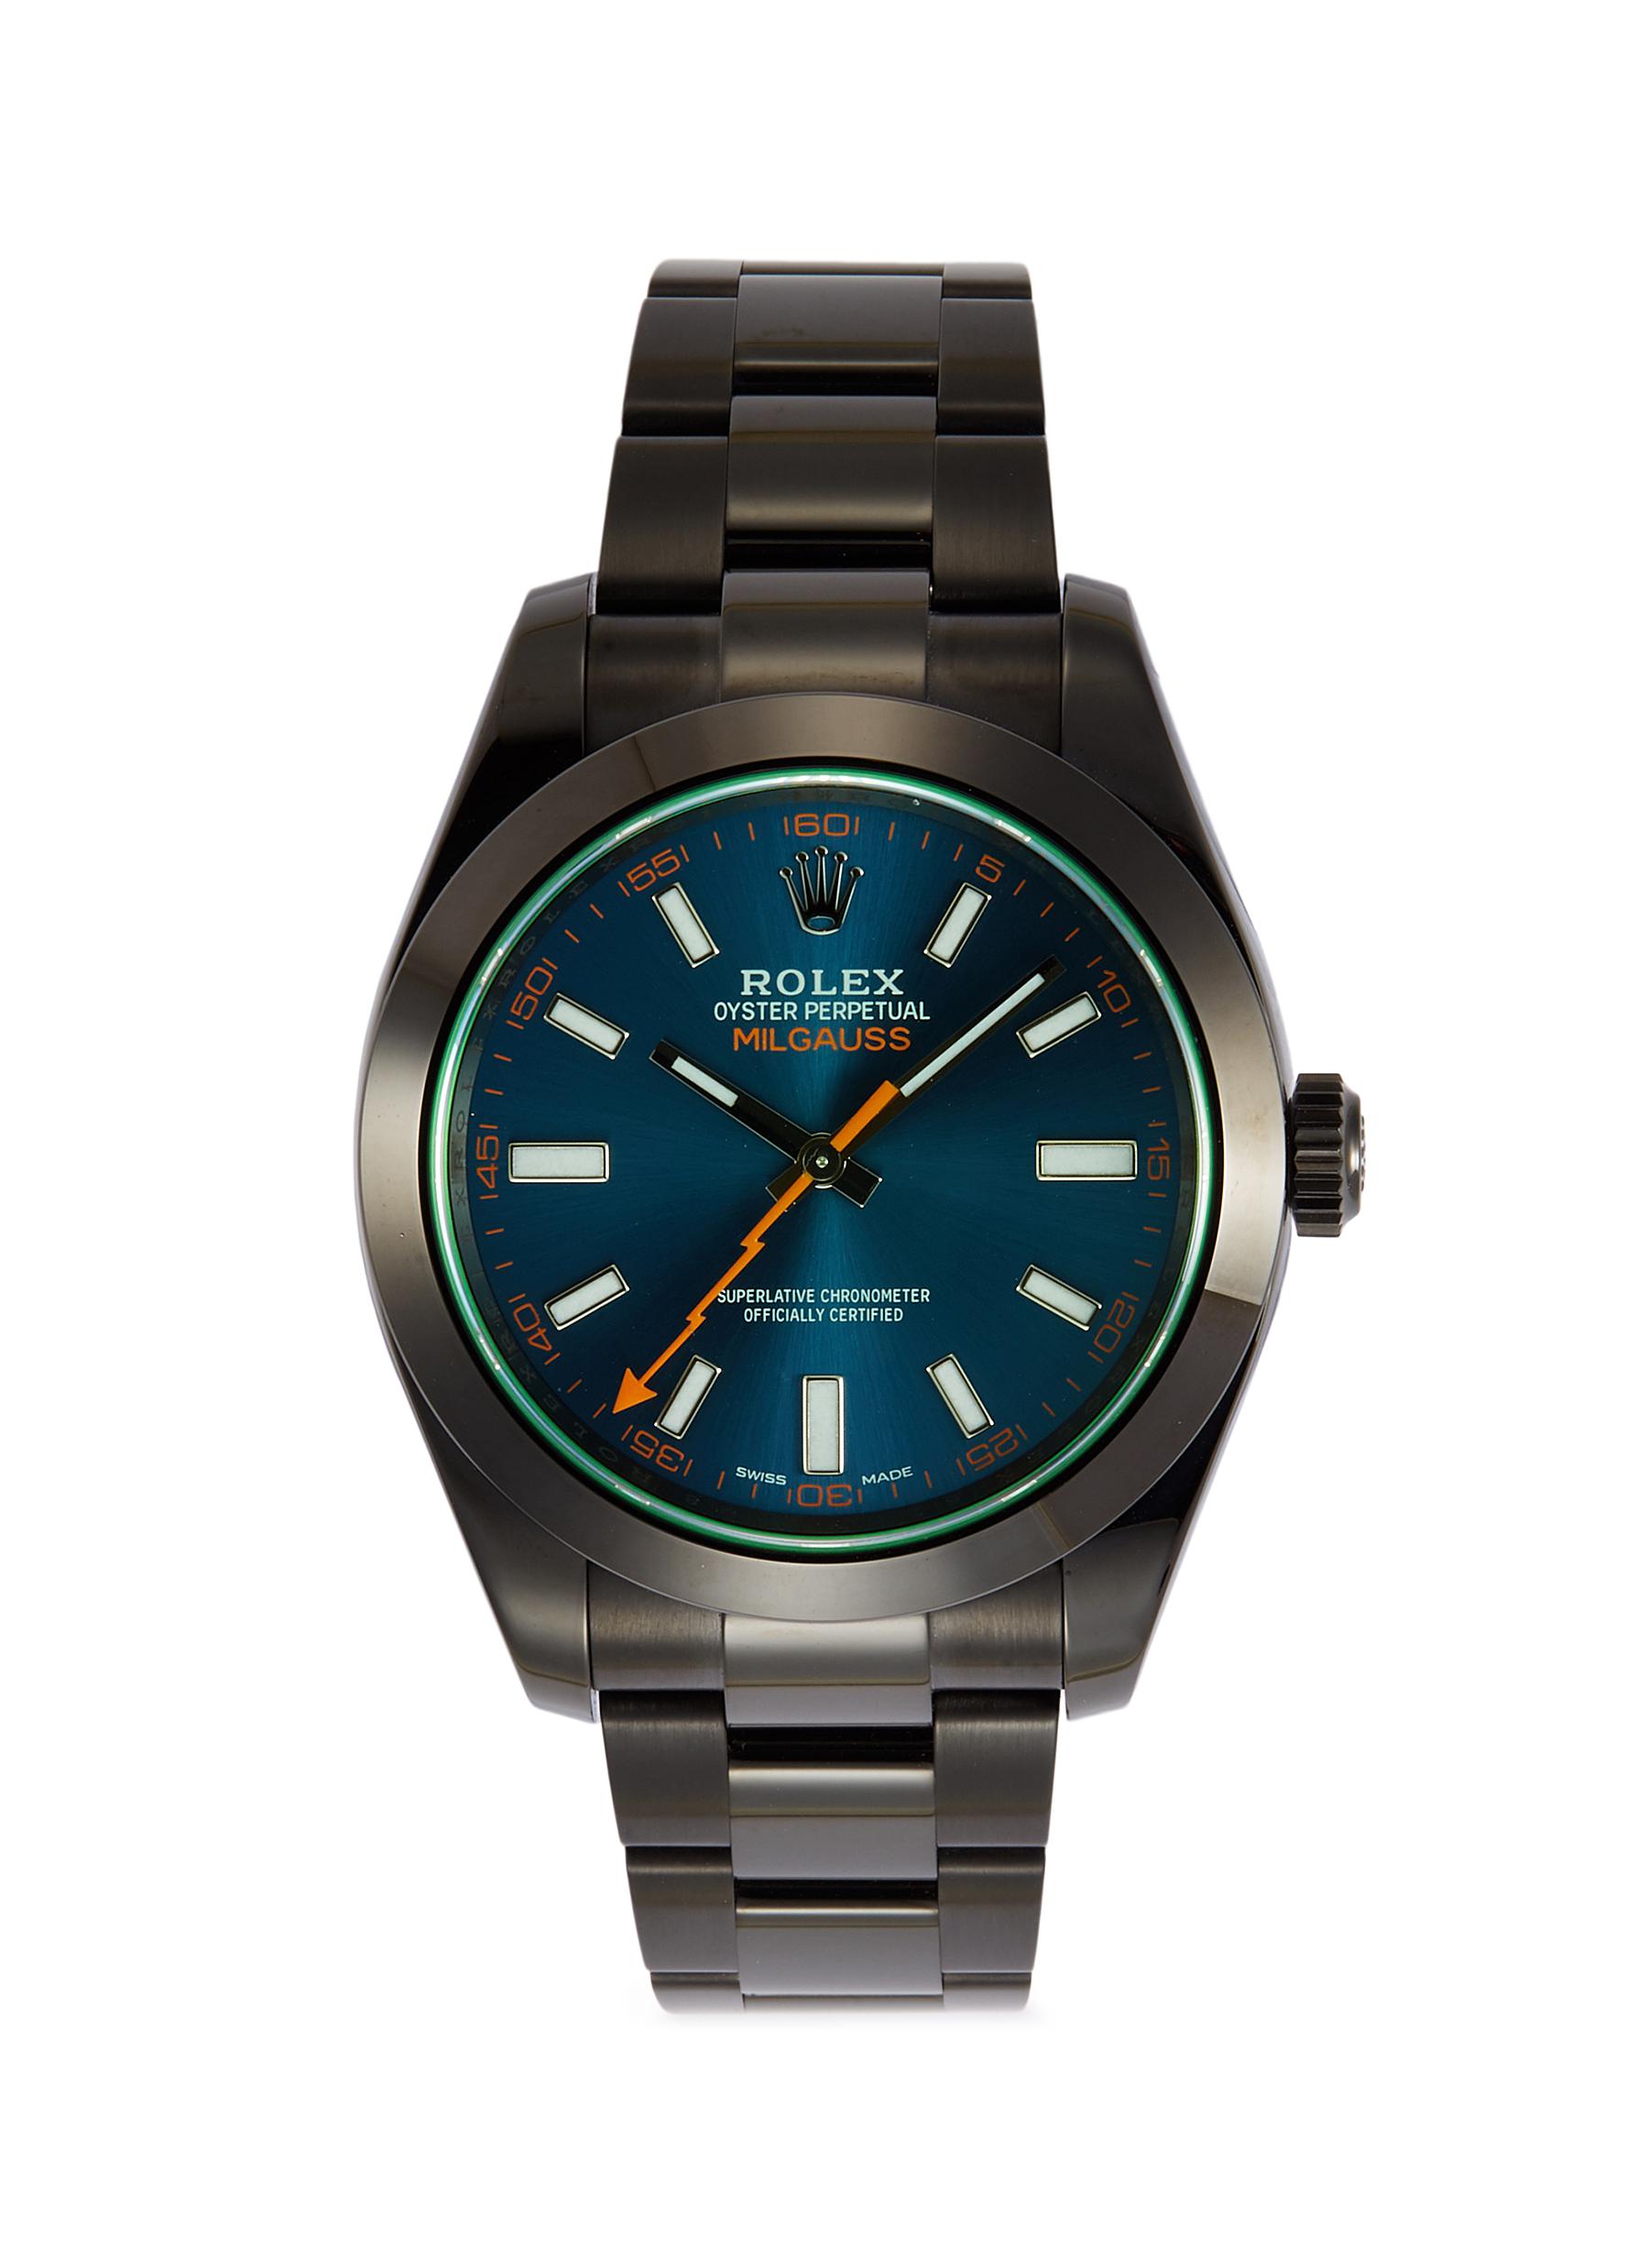 the oyster perpetual milgauss